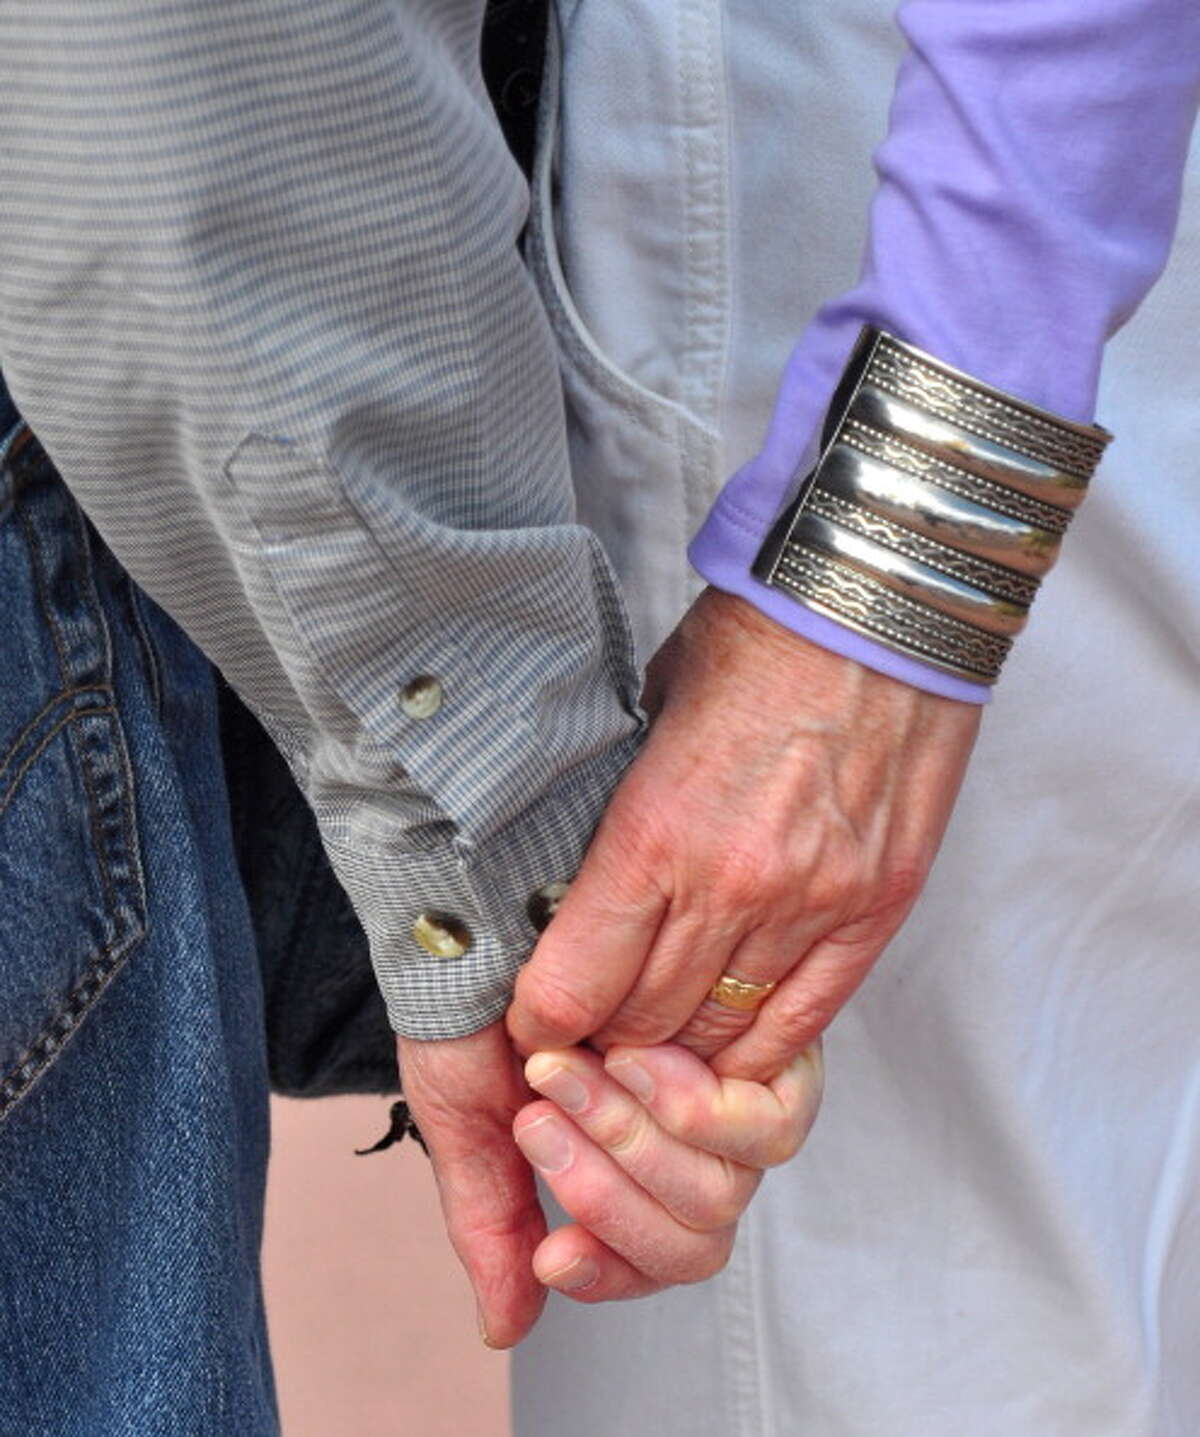 24. Santa Fe, New Mexico This photo shows a senior couple hold hands at an outdoor concert in Santa Fe, New Mexico on Sept. 23, 2012.